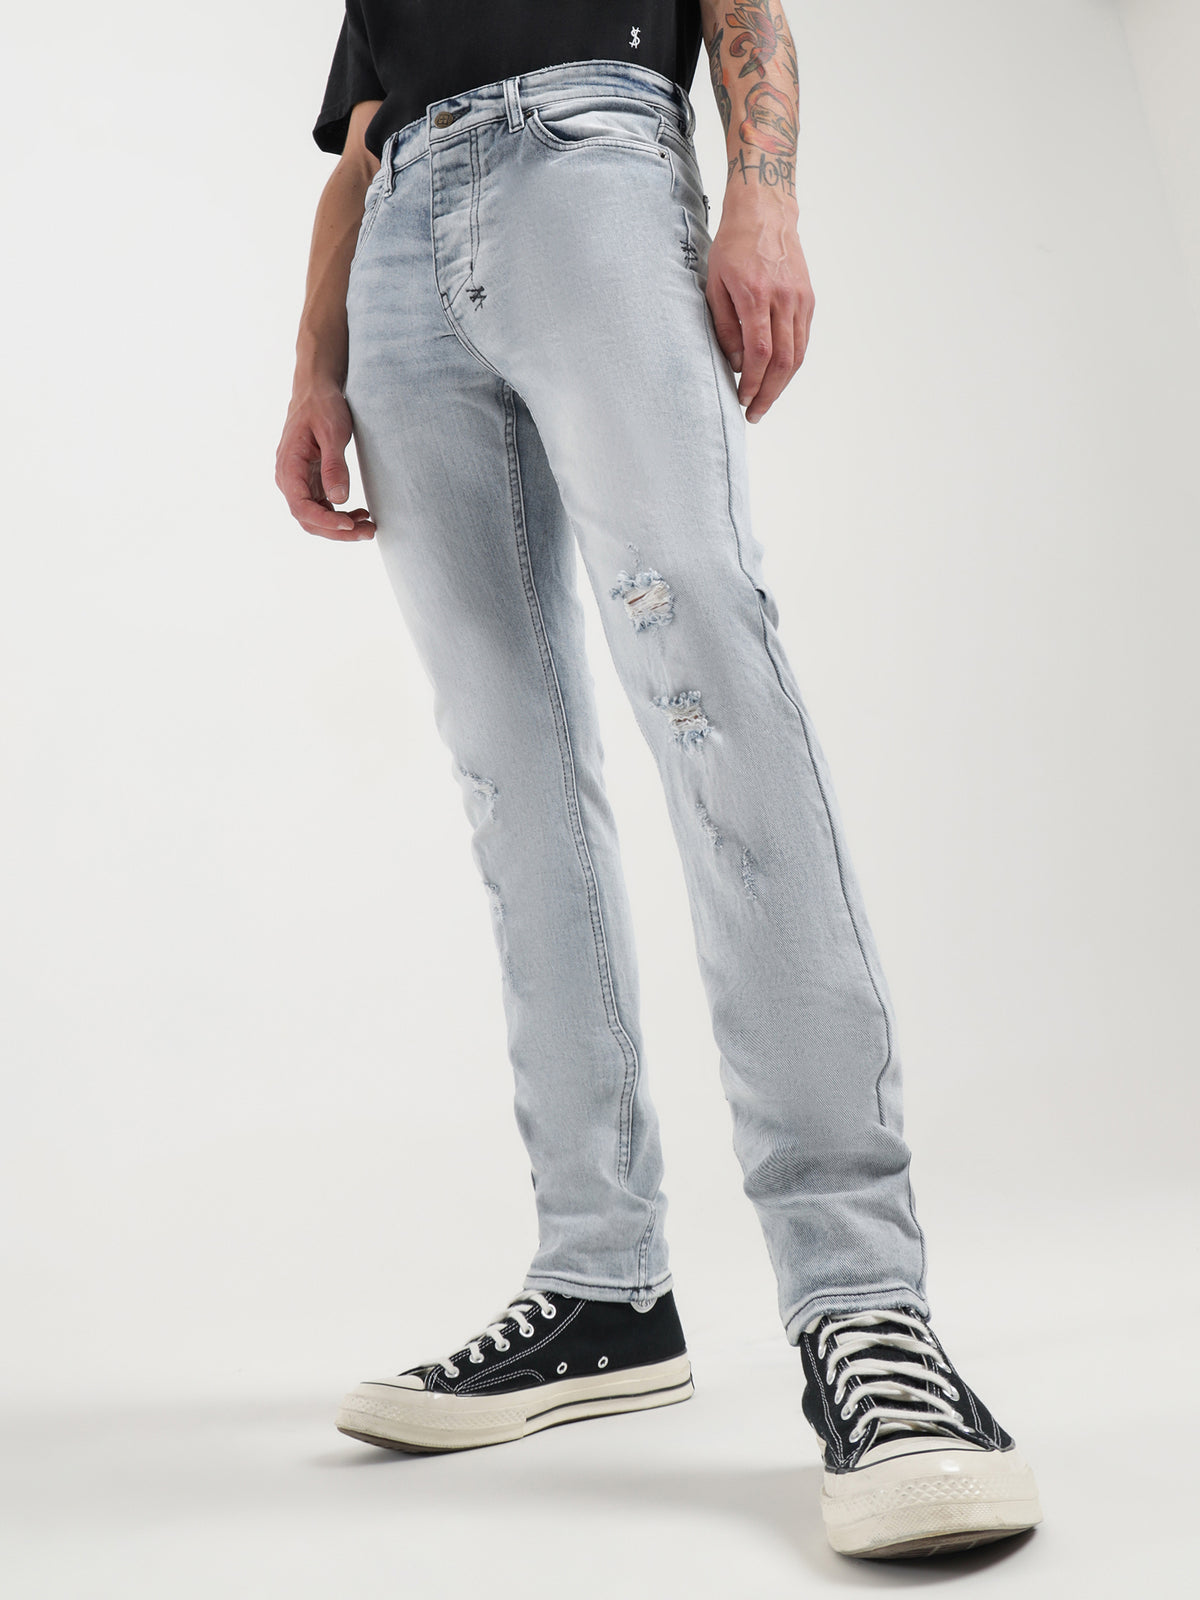 Chitch Slim Fit Jeans in Philly Blue